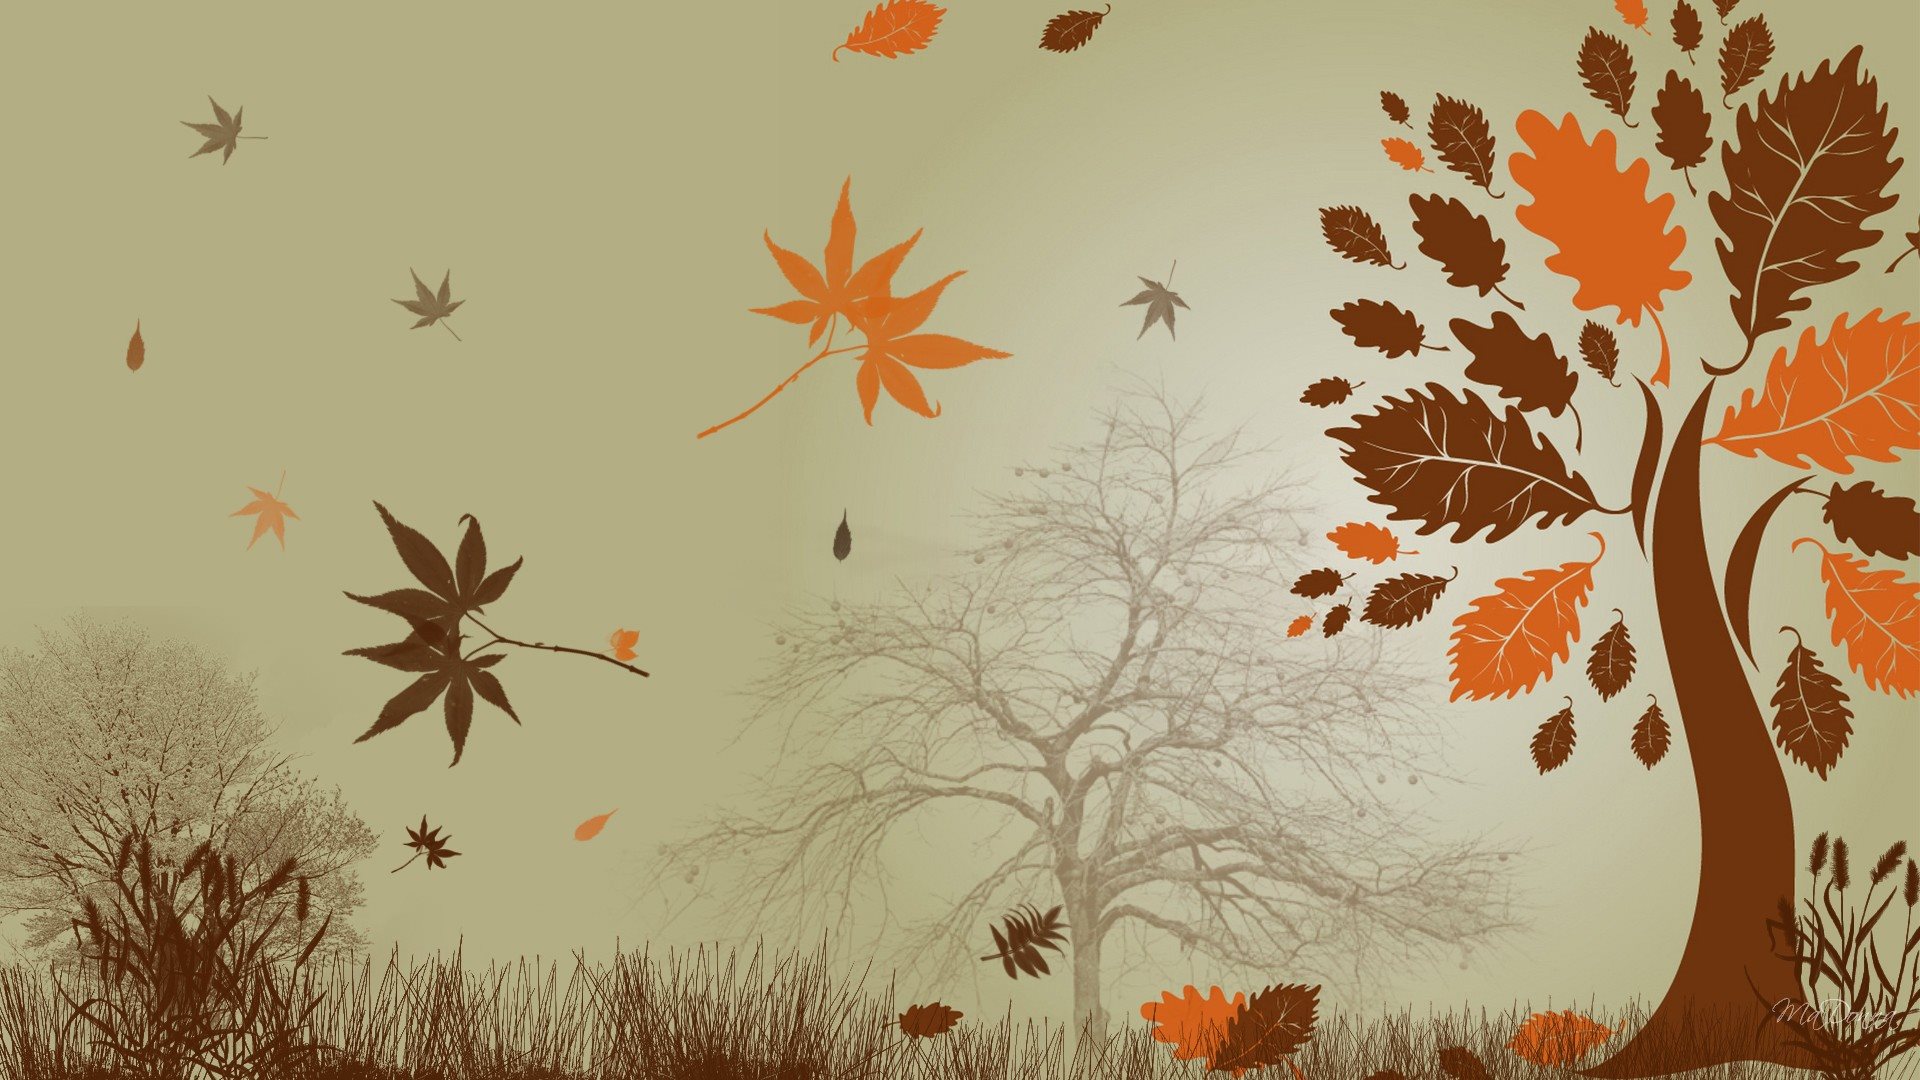 Discover 67+ 1920 x 1080 autumn wallpaper best - in.cdgdbentre